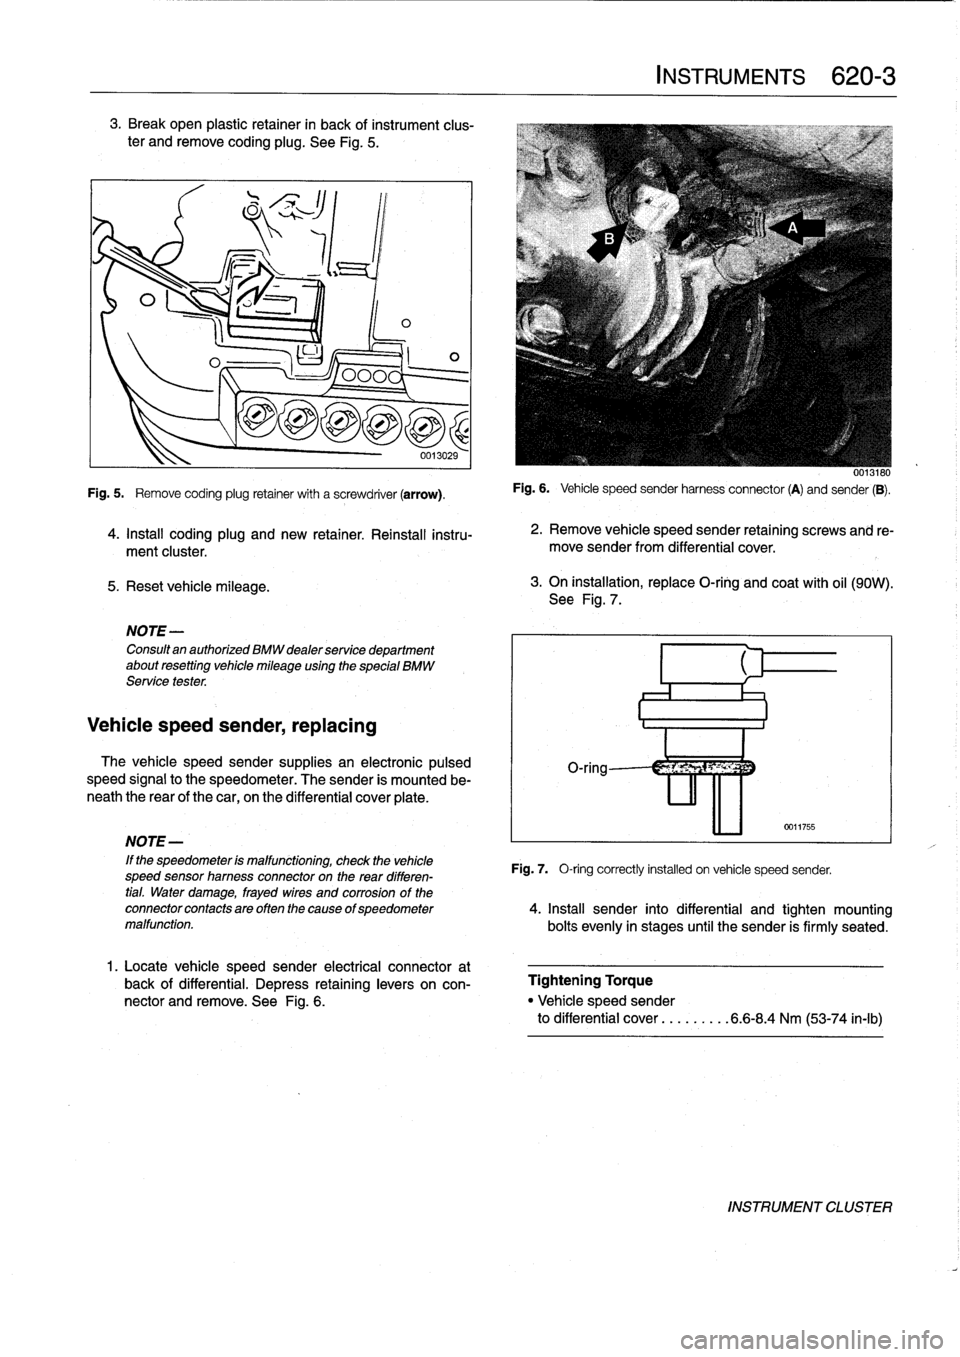 BMW M3 1998 E36 Service Manual 3
.
Break
open
plastic
retainer
in
back
of
instrument
clus-
ter
andremove
coding
plug
.
See
Fig
.
5
.

5
.
Reset
vehicle
mileage
.

1
ILO

NOTE-

Consultan
authorized
BMW
dealer
service
department
abo